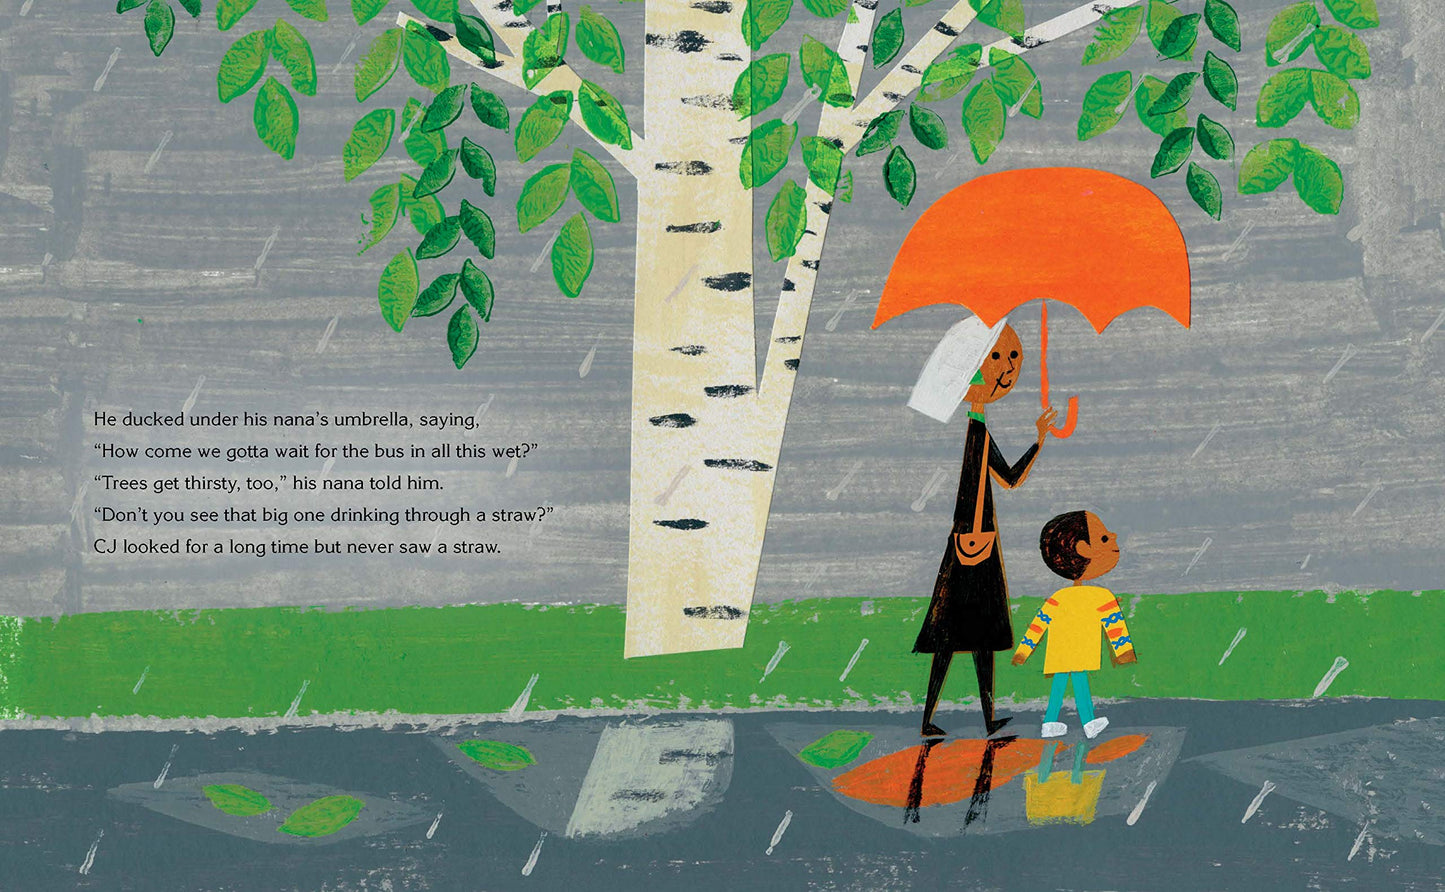 inside view with drawing of a woman and child walking in the rain with an umbrella, and text